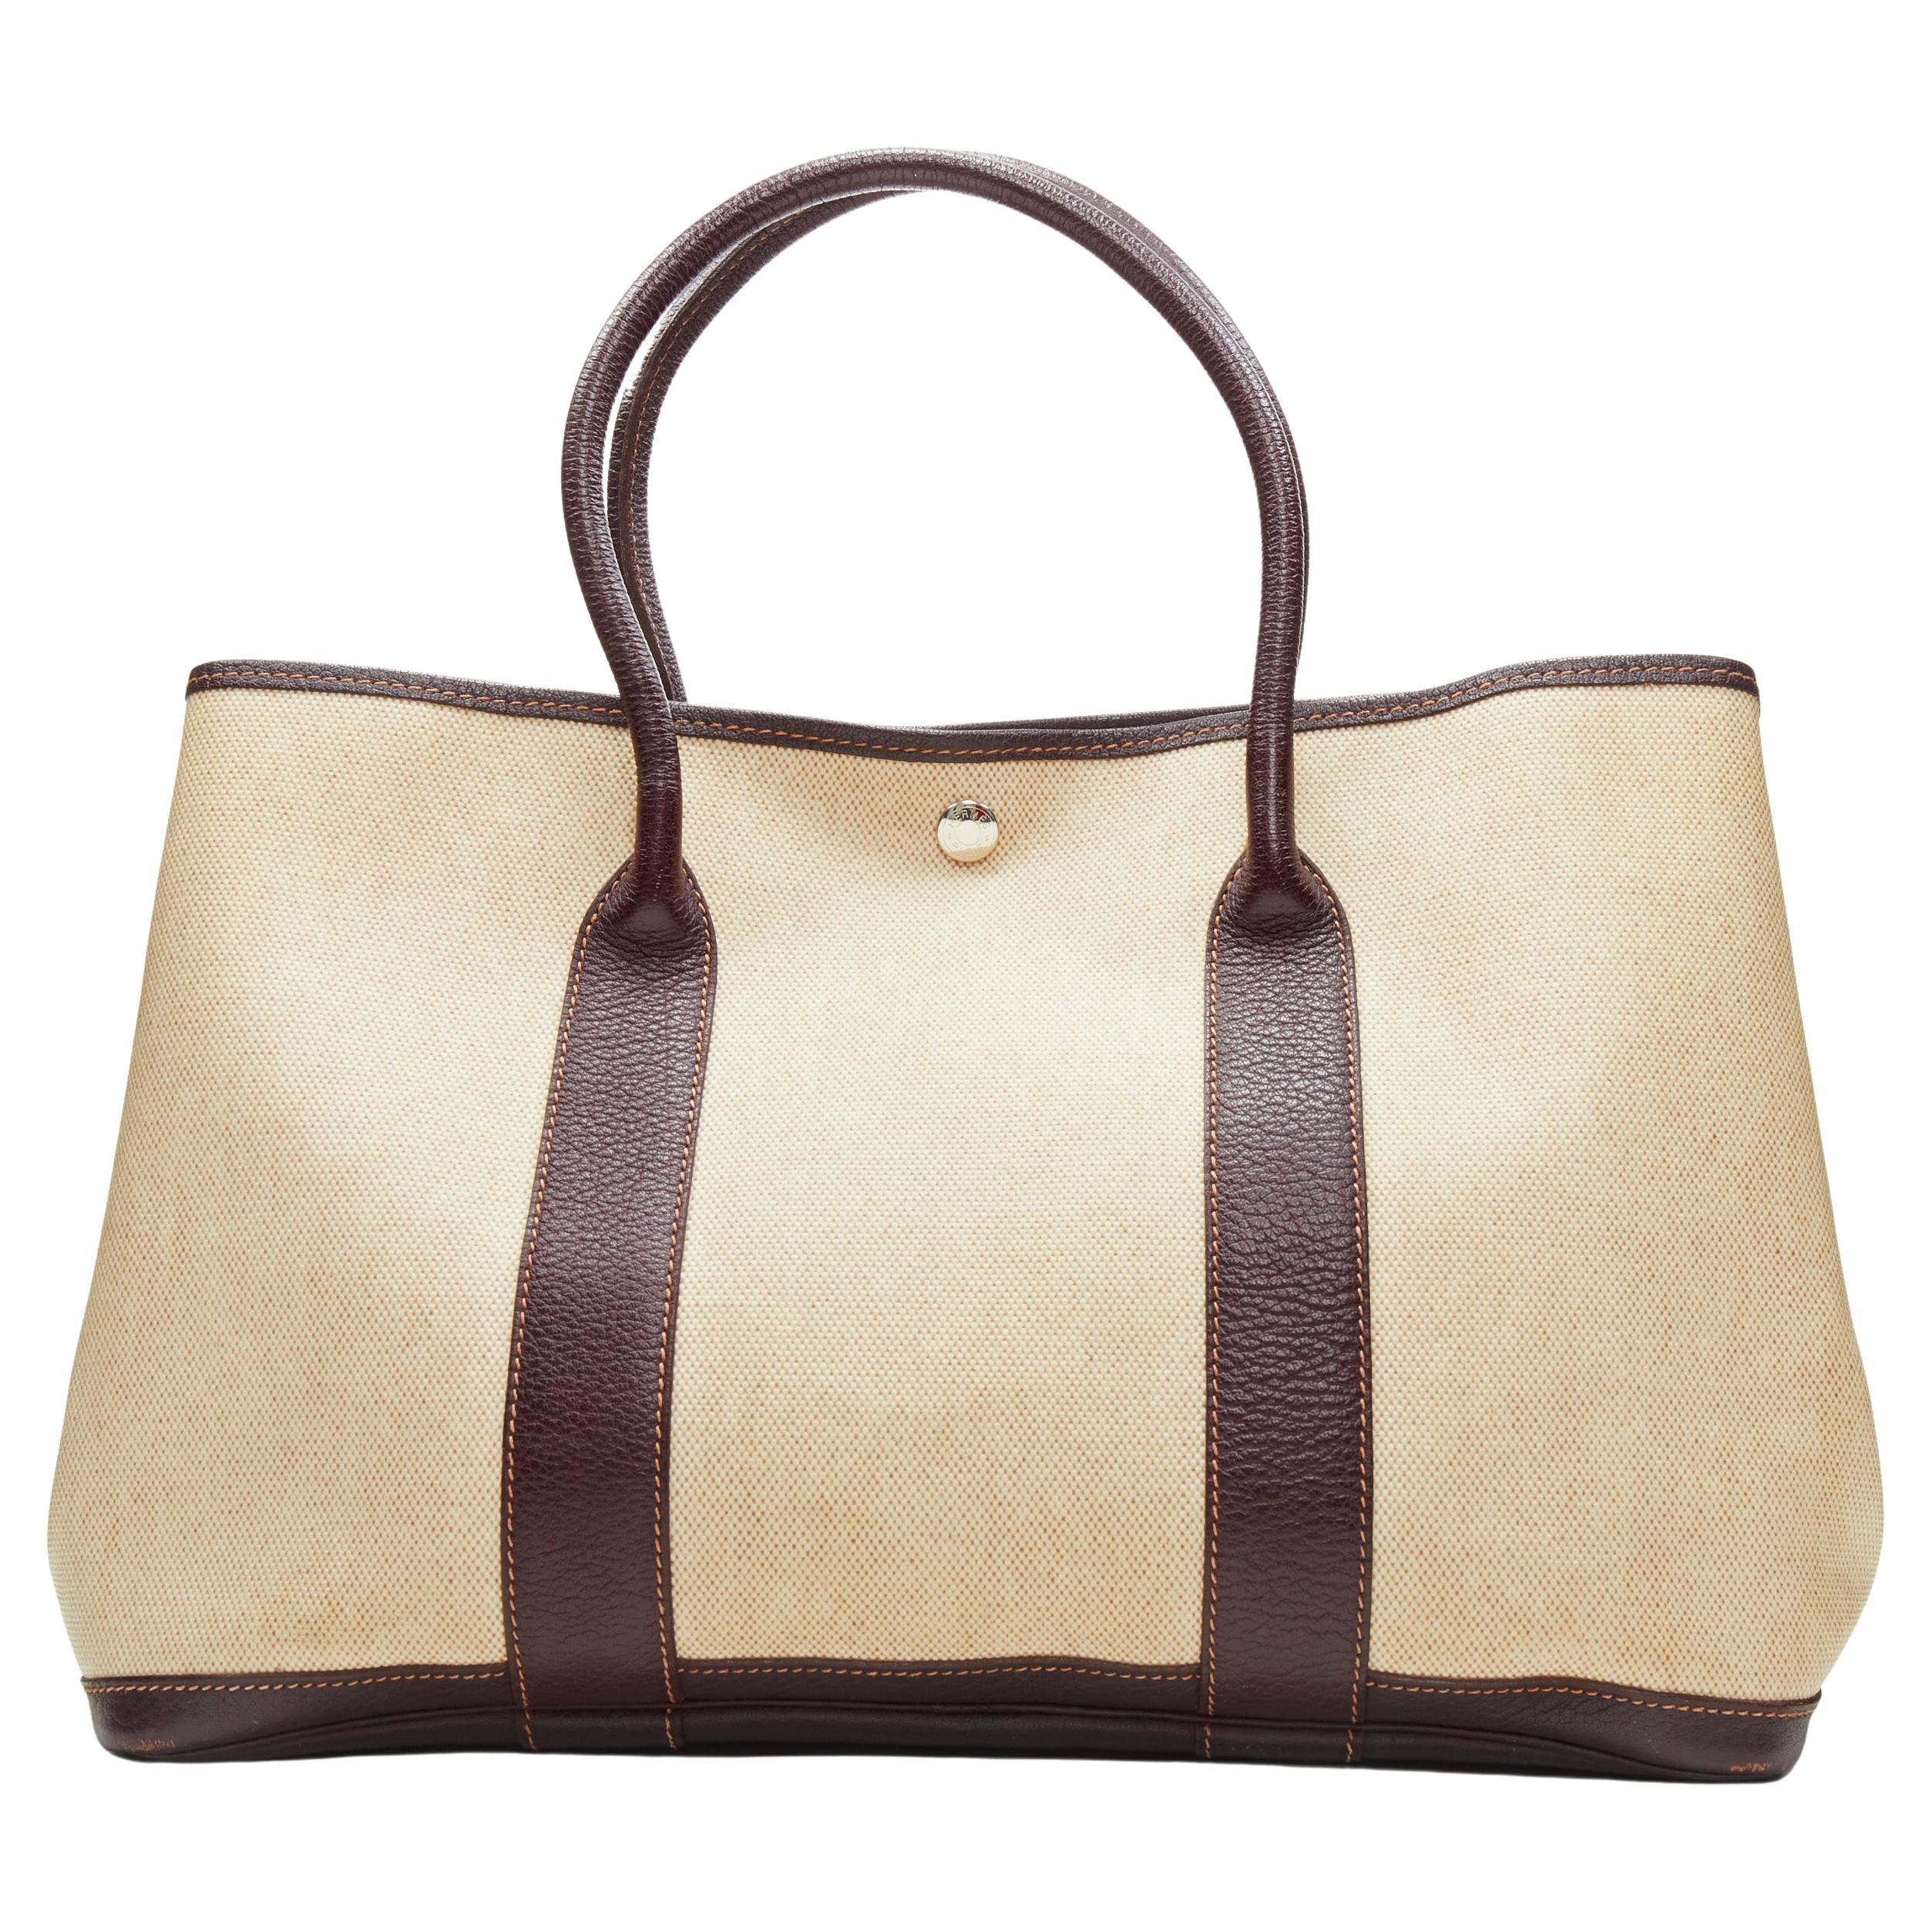 HERMES Garden Party 36 beige coated canvas chocolate brown leather trim tote bag